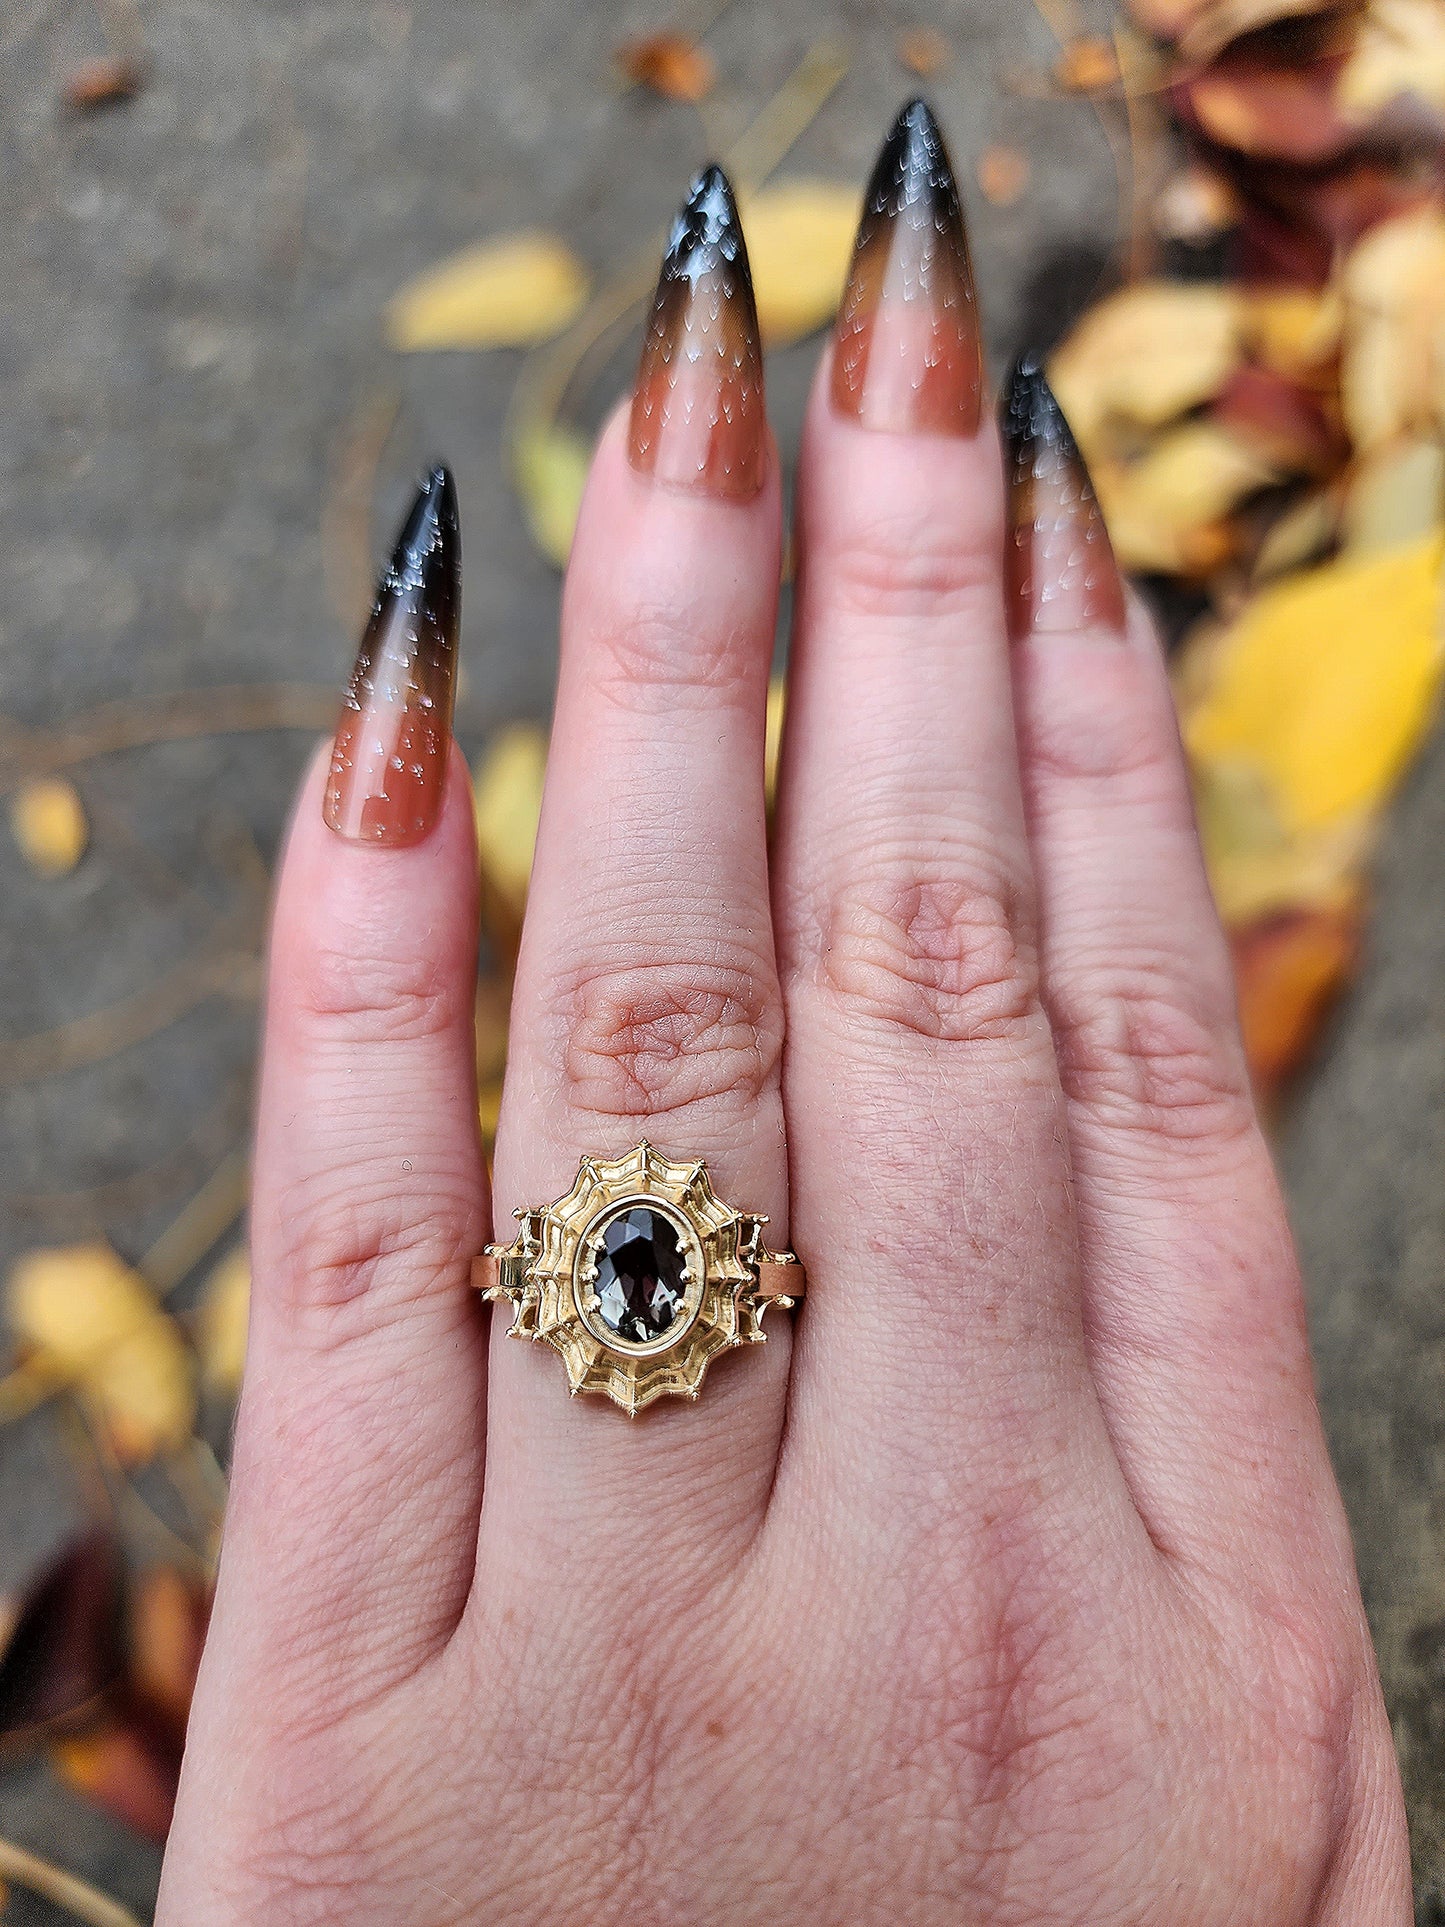 Morticia Spider Web Engagement Ring Gothic 14k Gold Fine Jewelry by SwankMetalsmithing